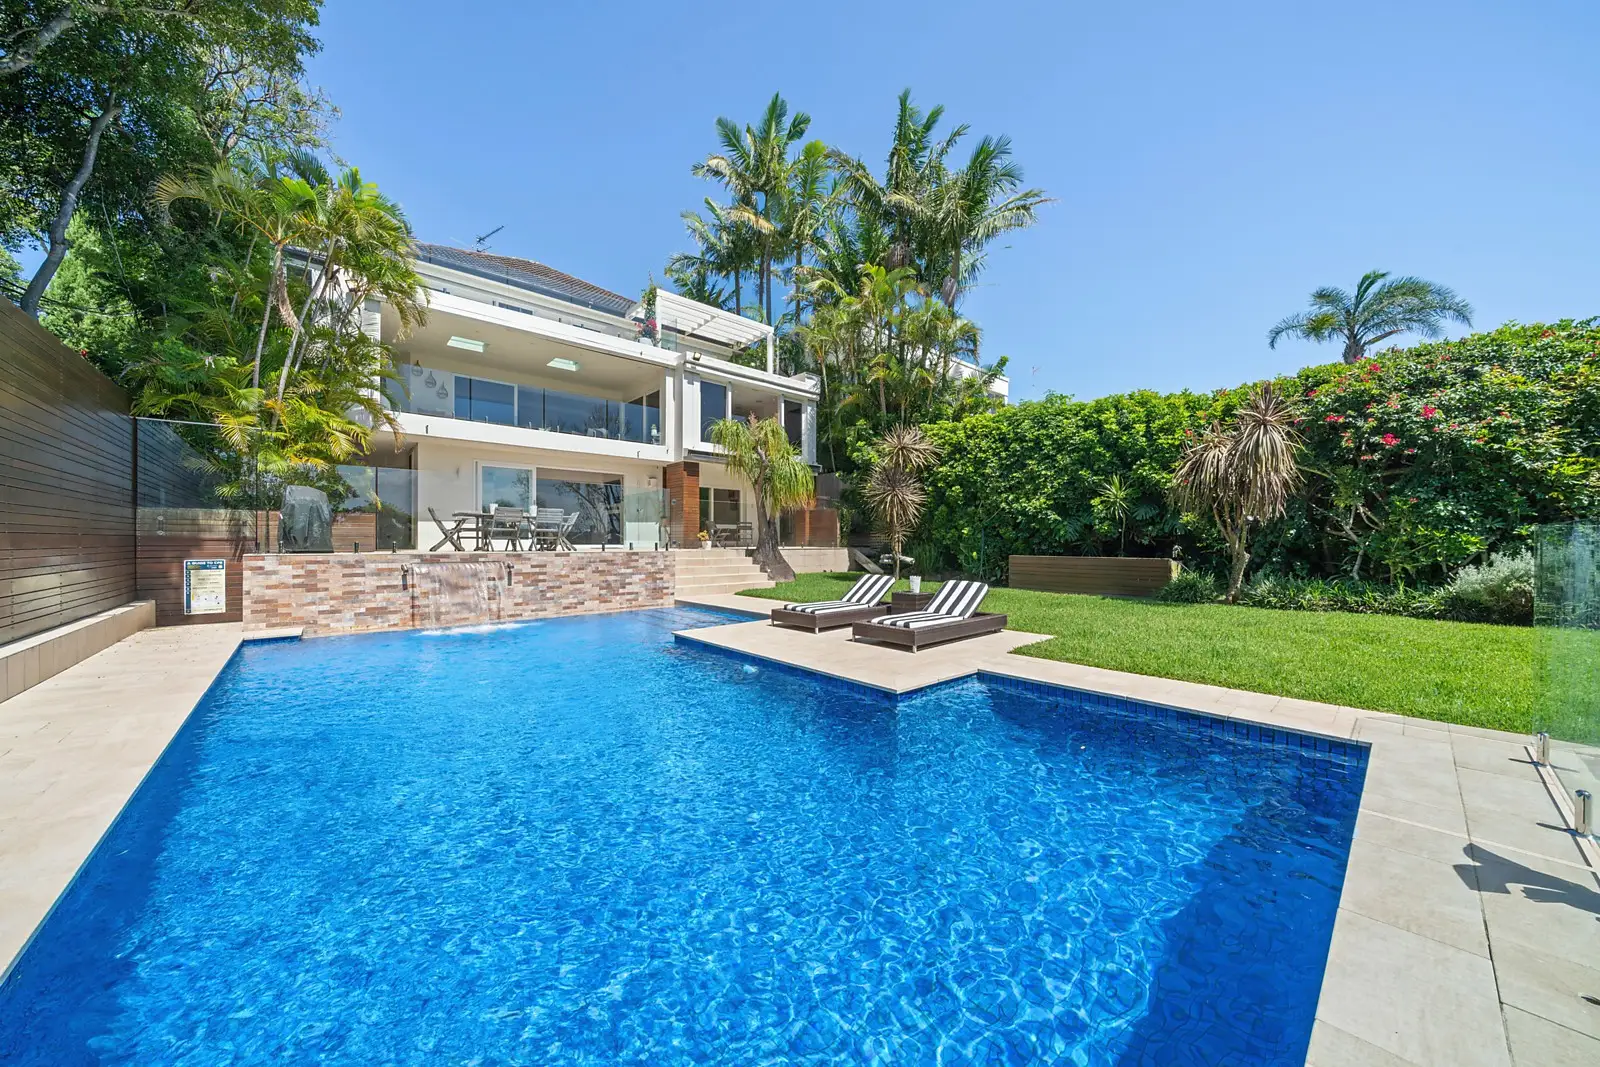 Photo #1: 18 Burrabirra Avenue, Vaucluse - Sold by Sydney Sotheby's International Realty